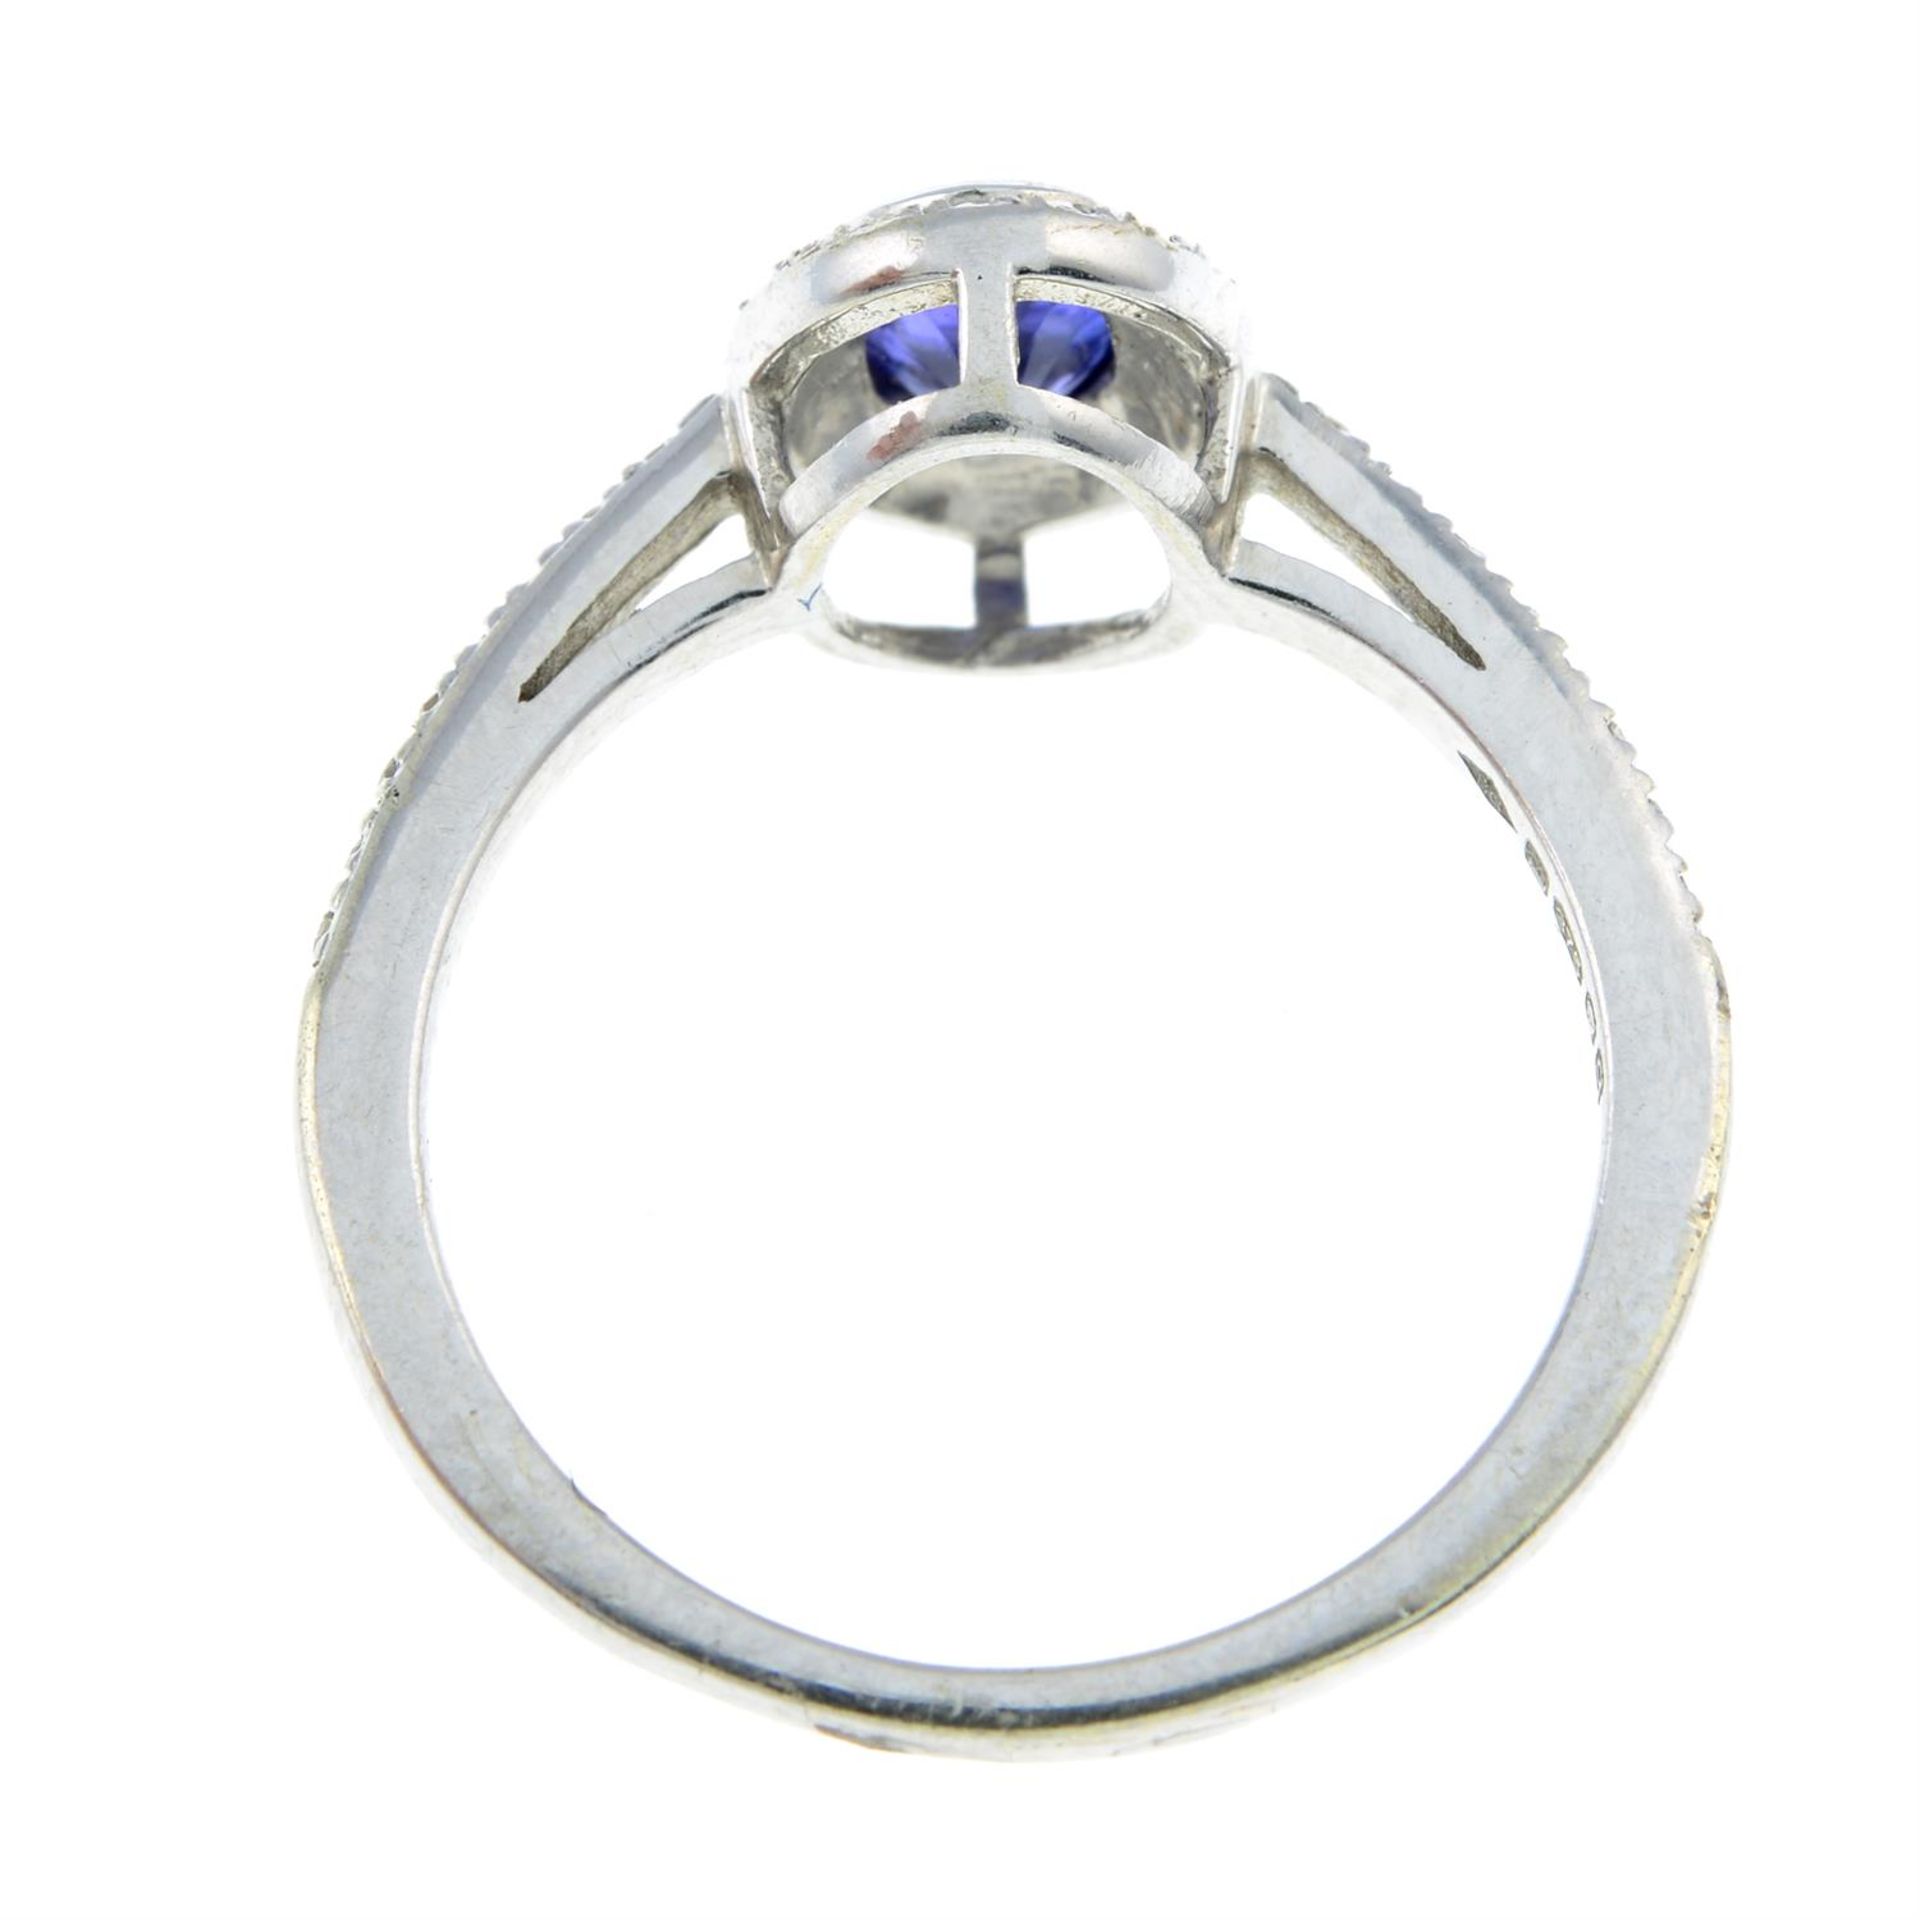 A 9ct gold tanzanite and diamond ring. - Image 2 of 2